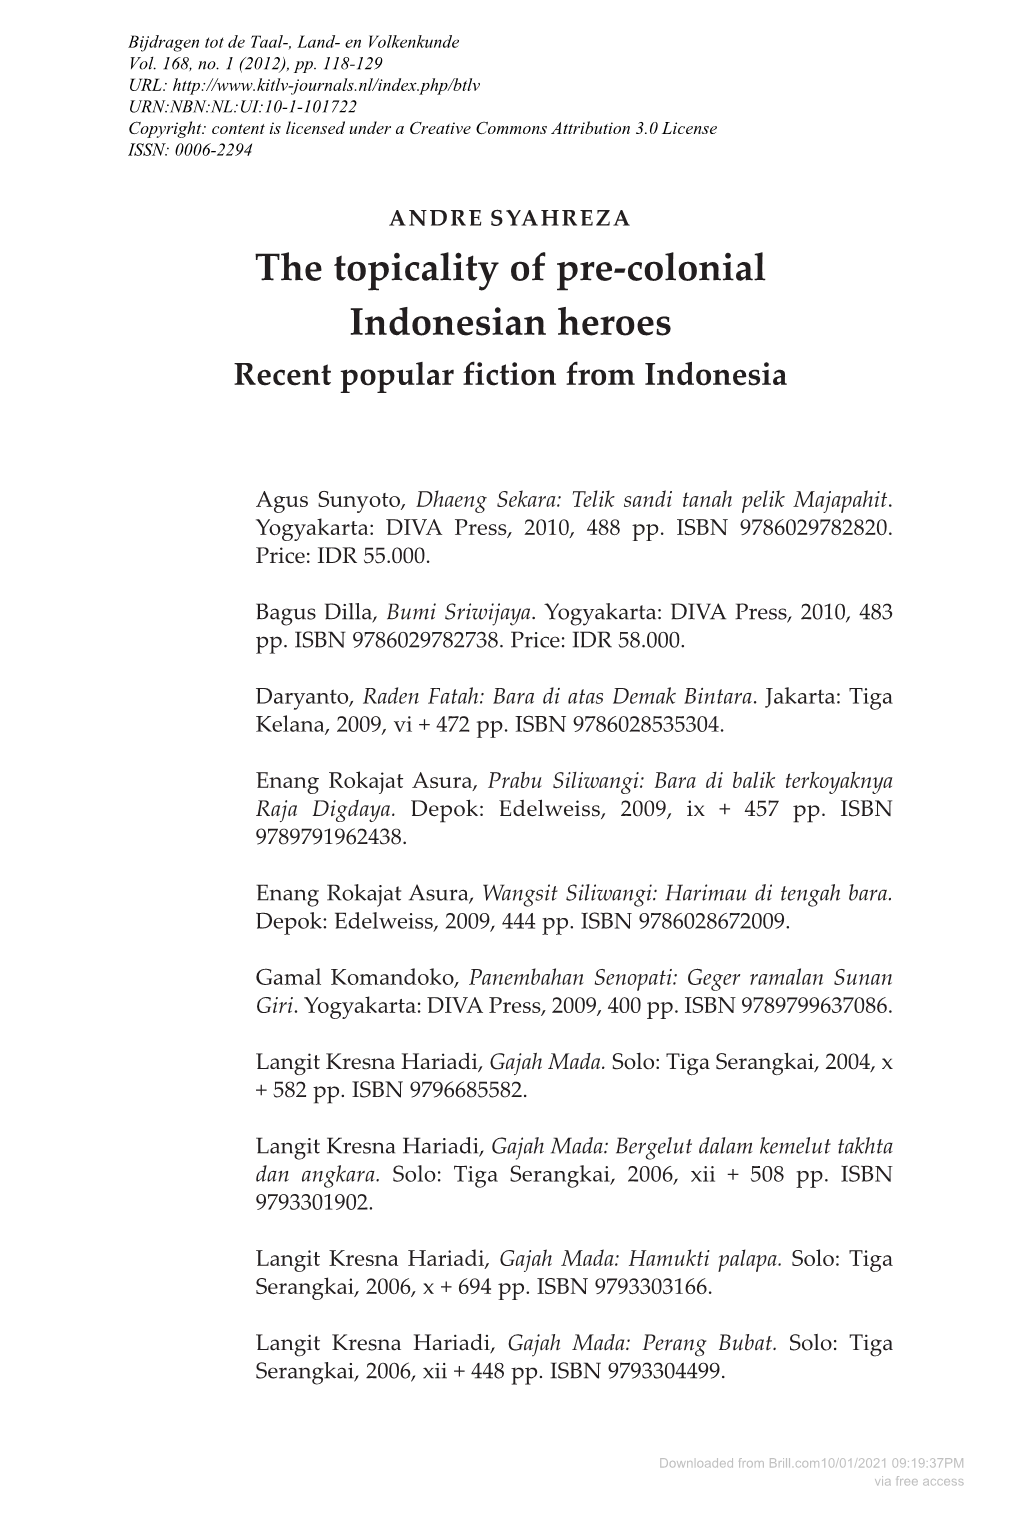 The Topicality of Pre-Colonial Indonesian Heroes Recent Popular Fiction from Indonesia